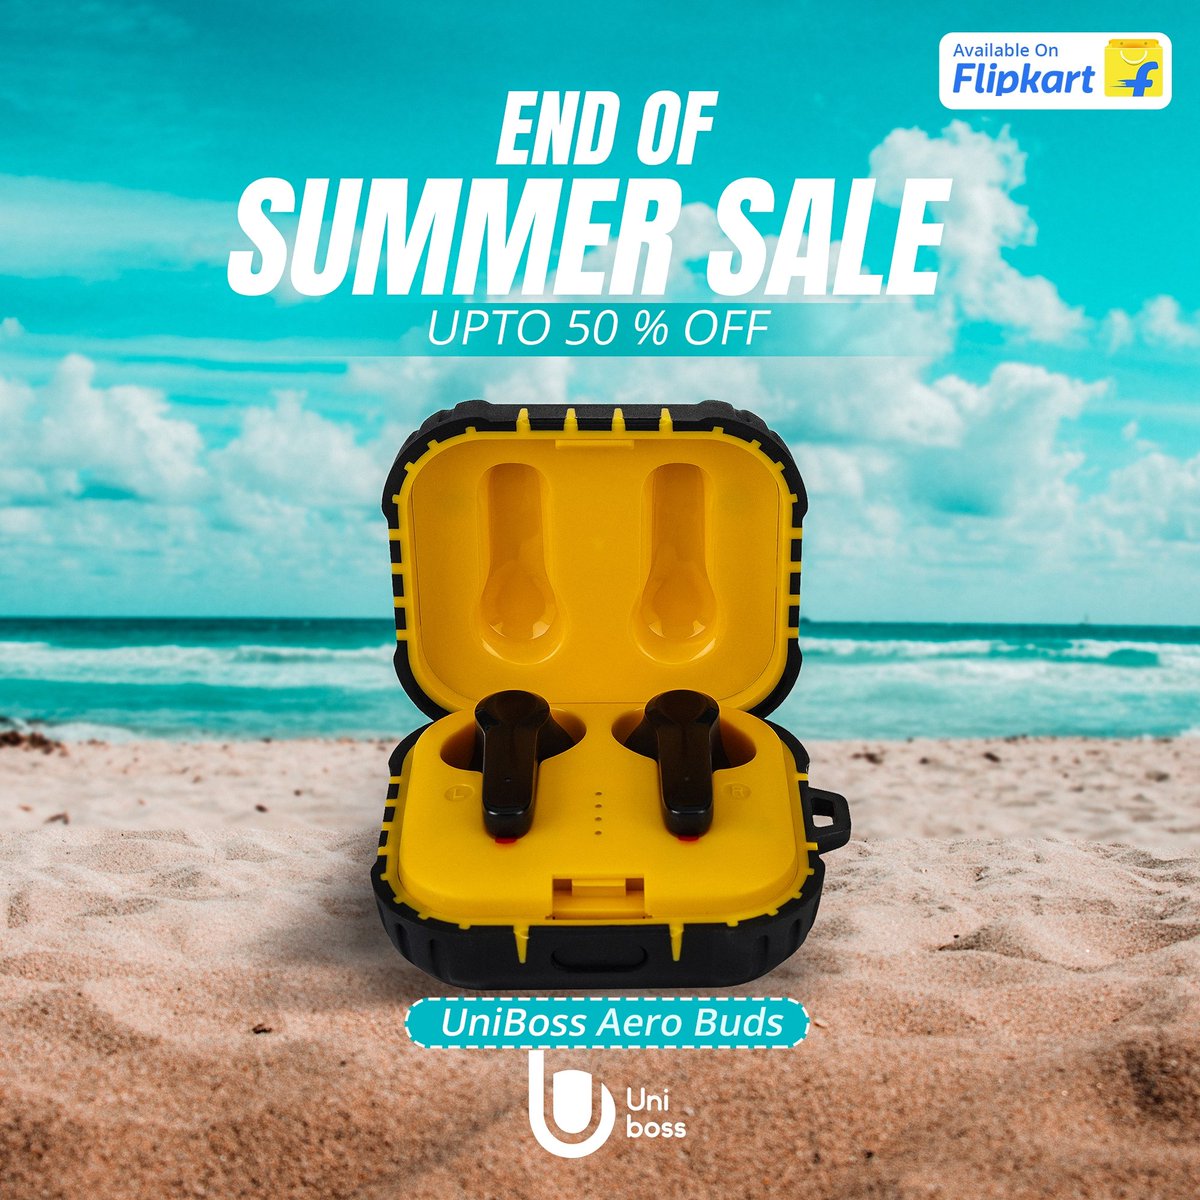 Uniboss Drops the Beat! Get your groove on with our sizzling End of Summer Sale.
 #ecommerce #sound  #bass #superb #neckband #wirelessheadphones #wirelessneckband #neckbands #airpods #bluetooth #soundquality #trending #trendingproducts #neckbandwirelss #earphone #earbuds #uniboss